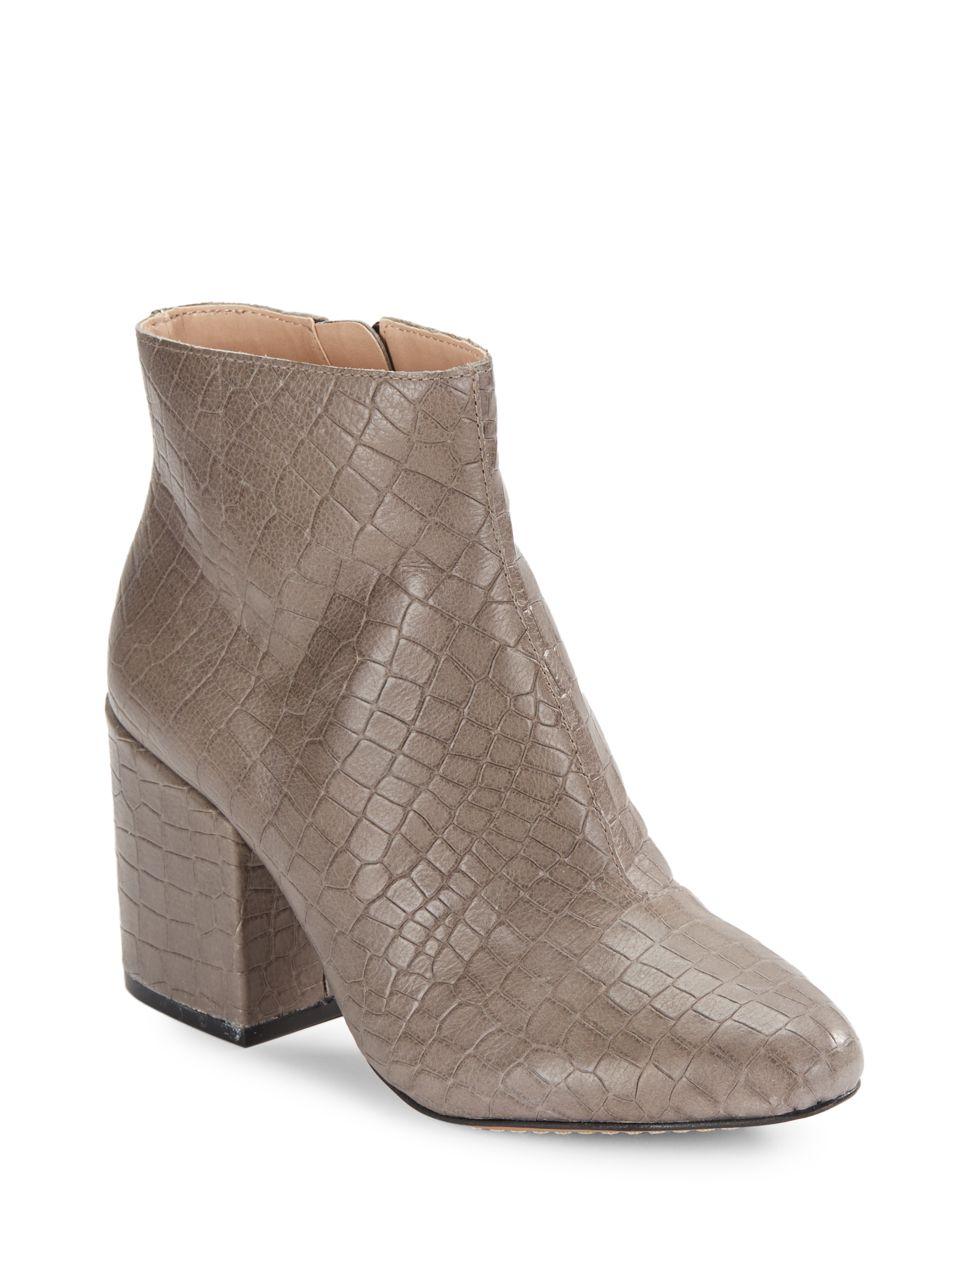 Lyst - French Connection Dilyla Embossed Leather Ankle Boots in Gray